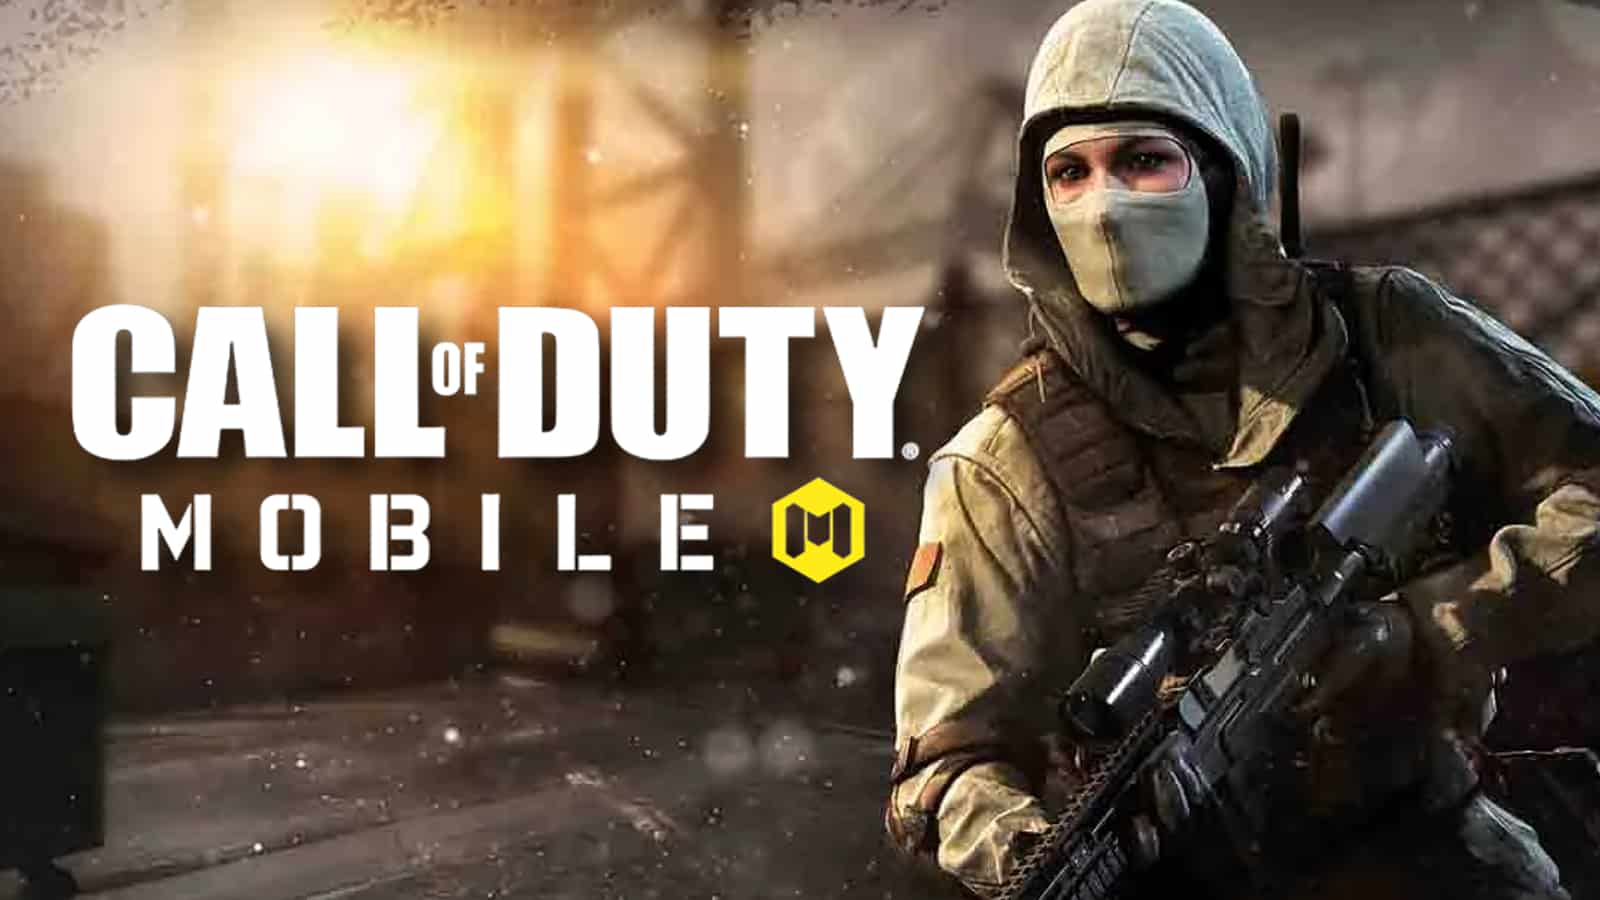 Win EVERY Battle Royale game - CALL OF DUTY MOBILE on PC Gameplay - Saving  Content